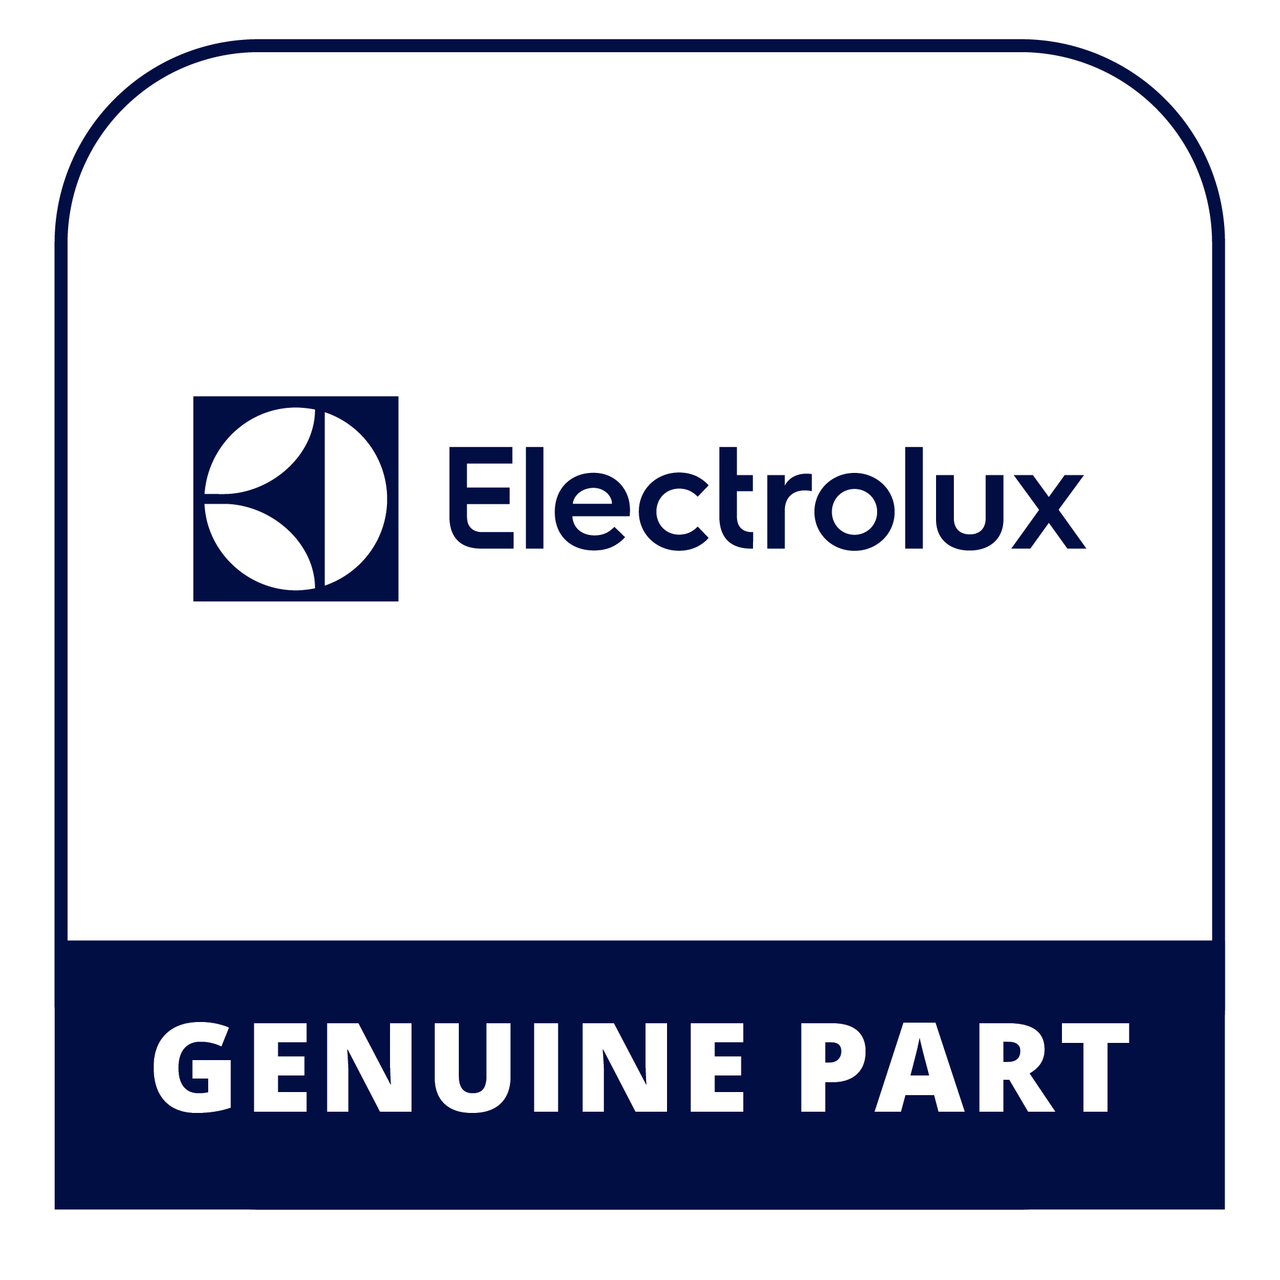 Frigidaire - Electrolux 318203827 Use & Care Guide - Genuine Electrolux Part